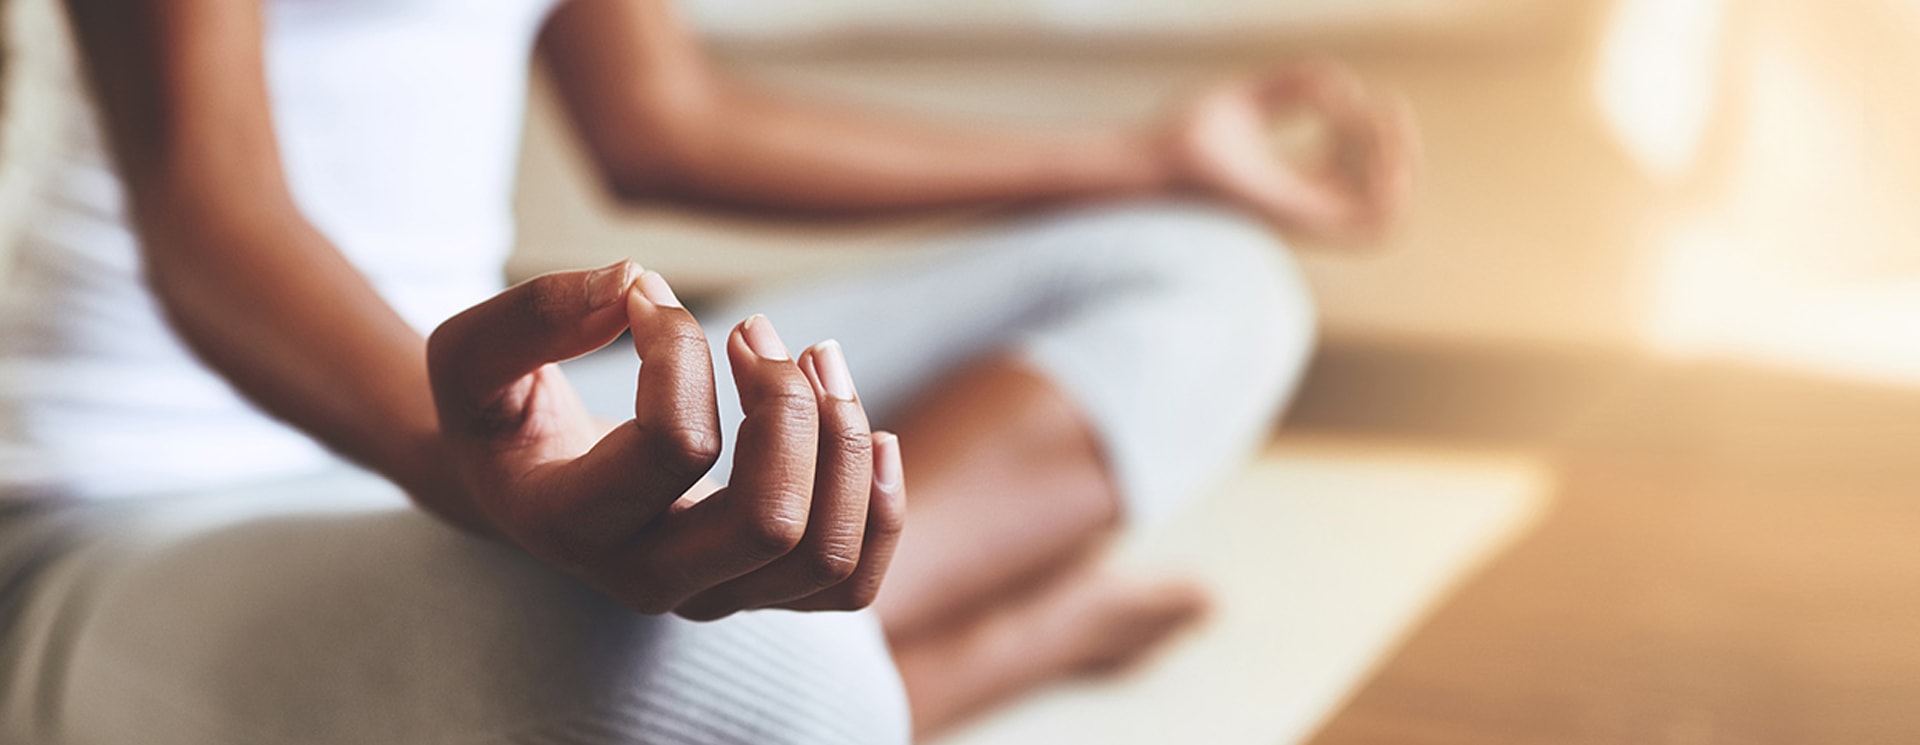 Meditation For Beginners: 5 Simple Tips to Get Started